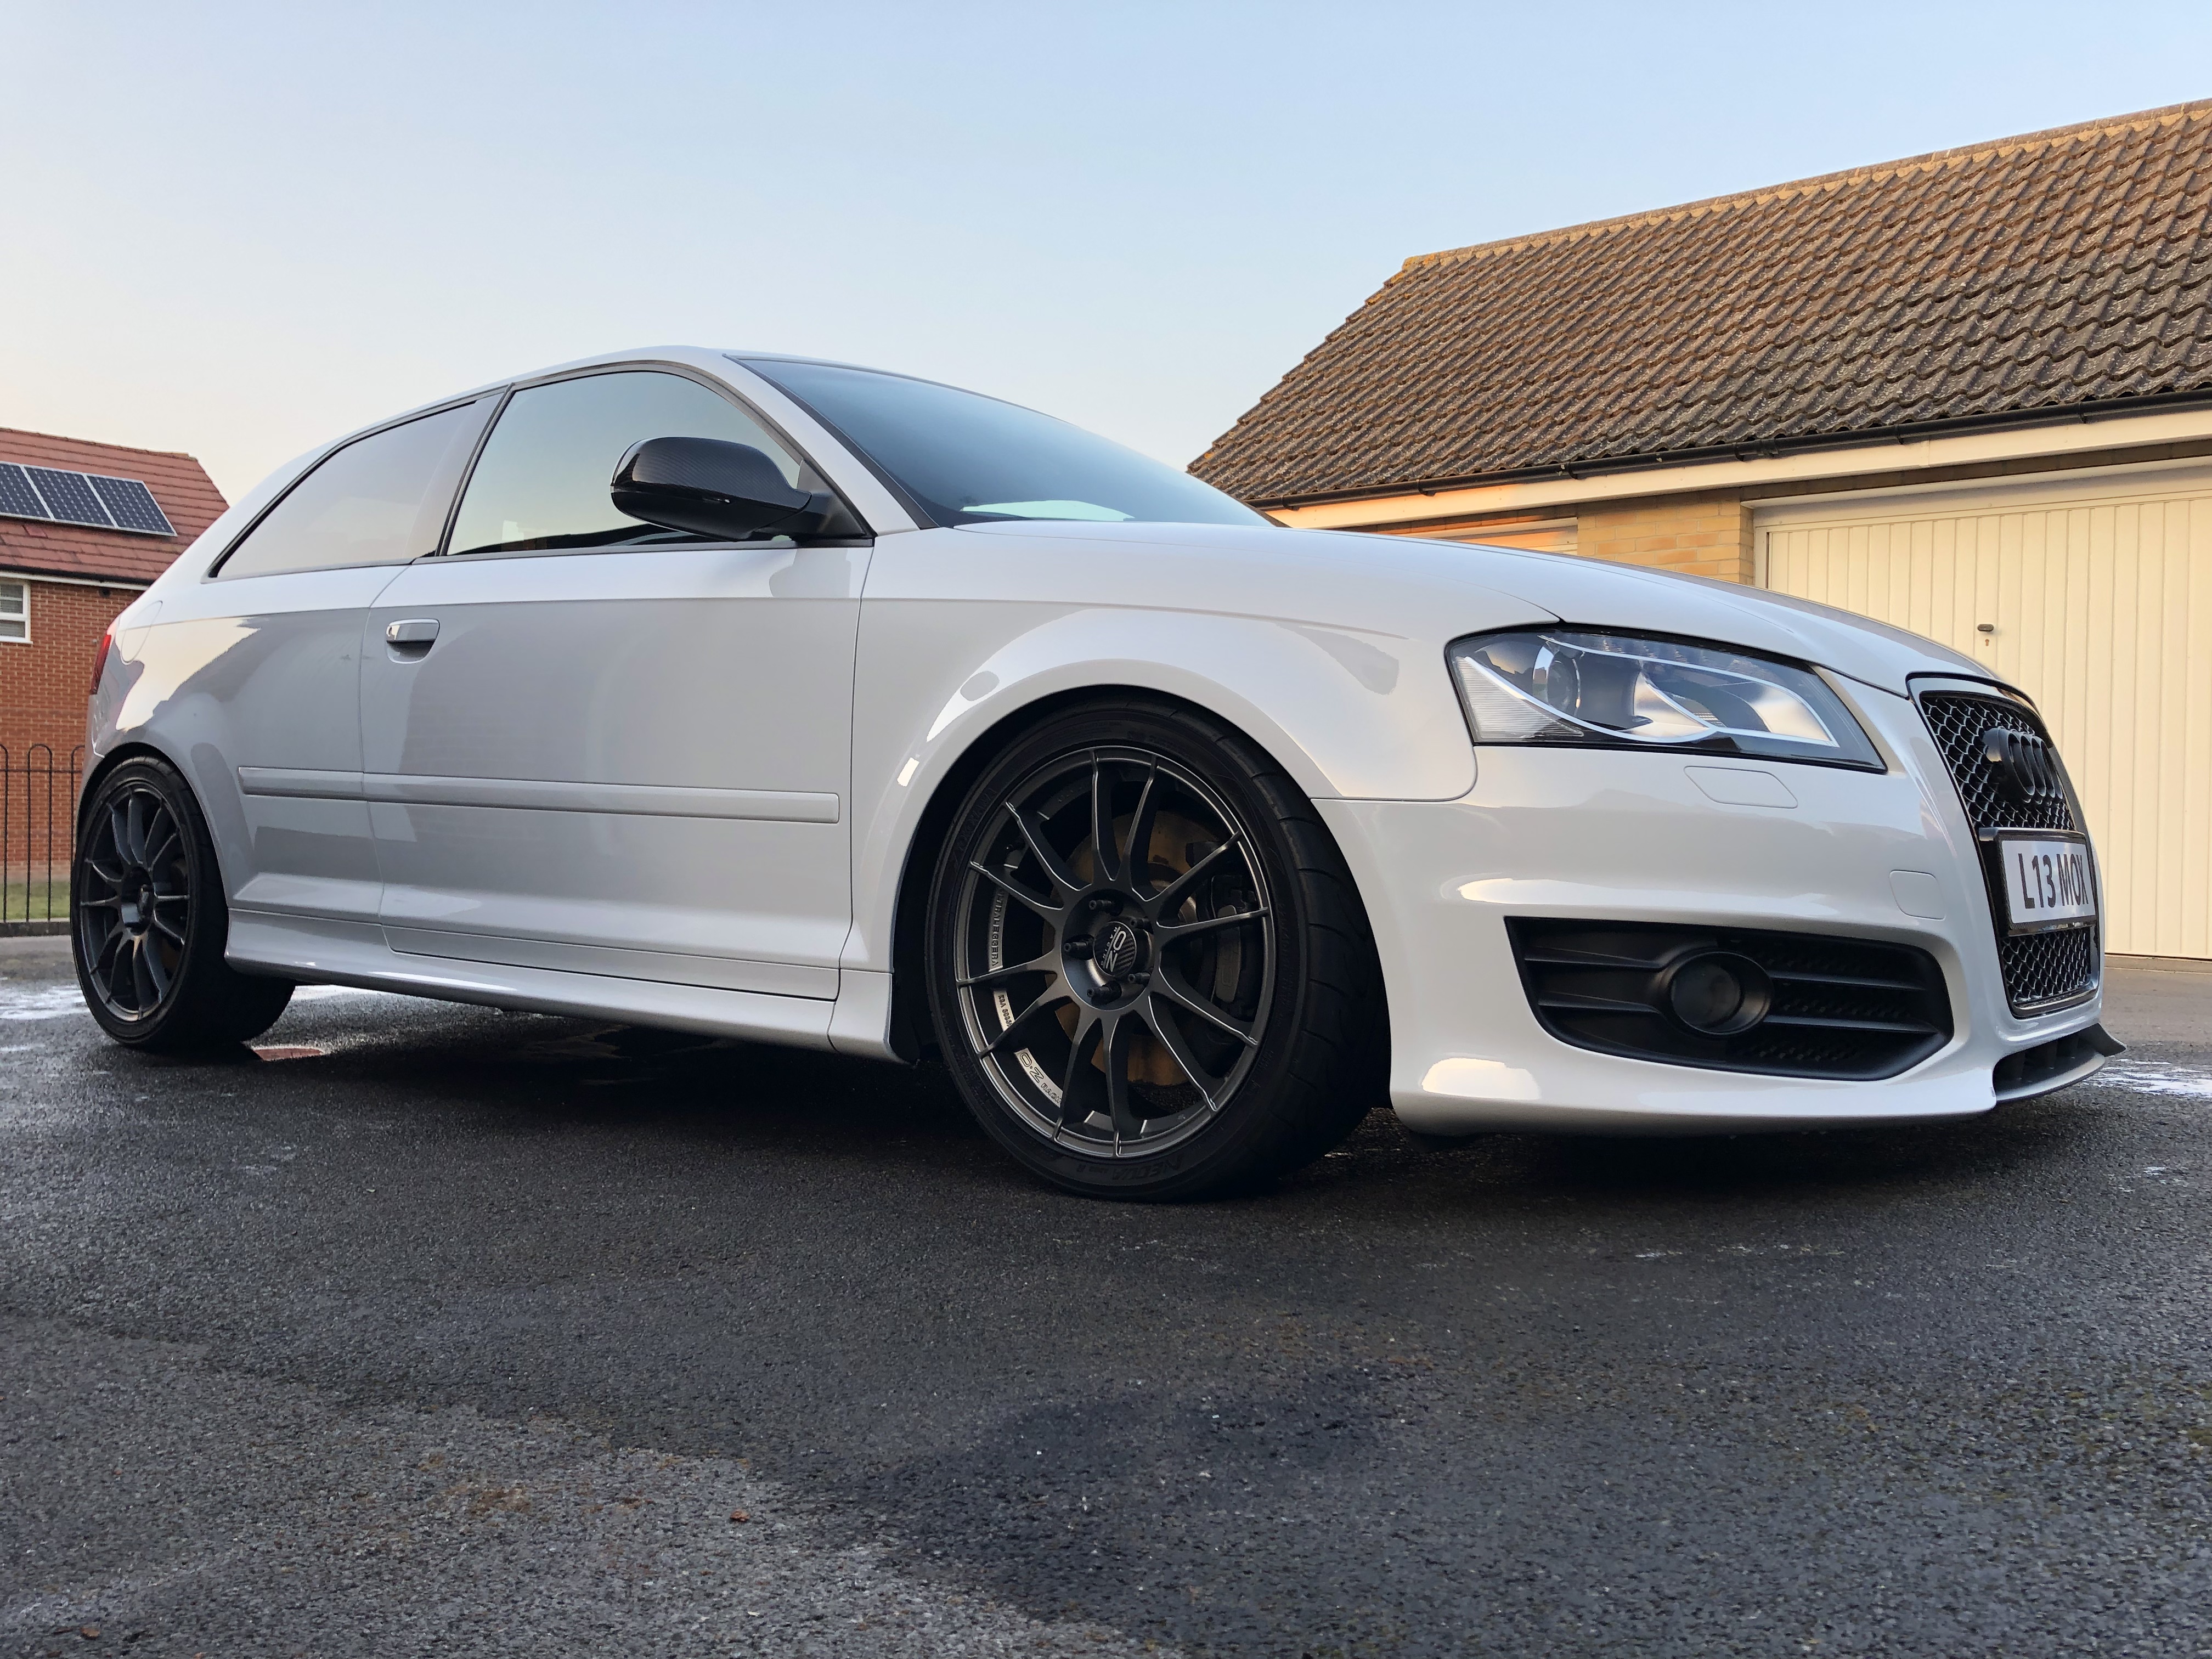 Audi S3 fast road project  - Page 1 - Readers' Cars - PistonHeads